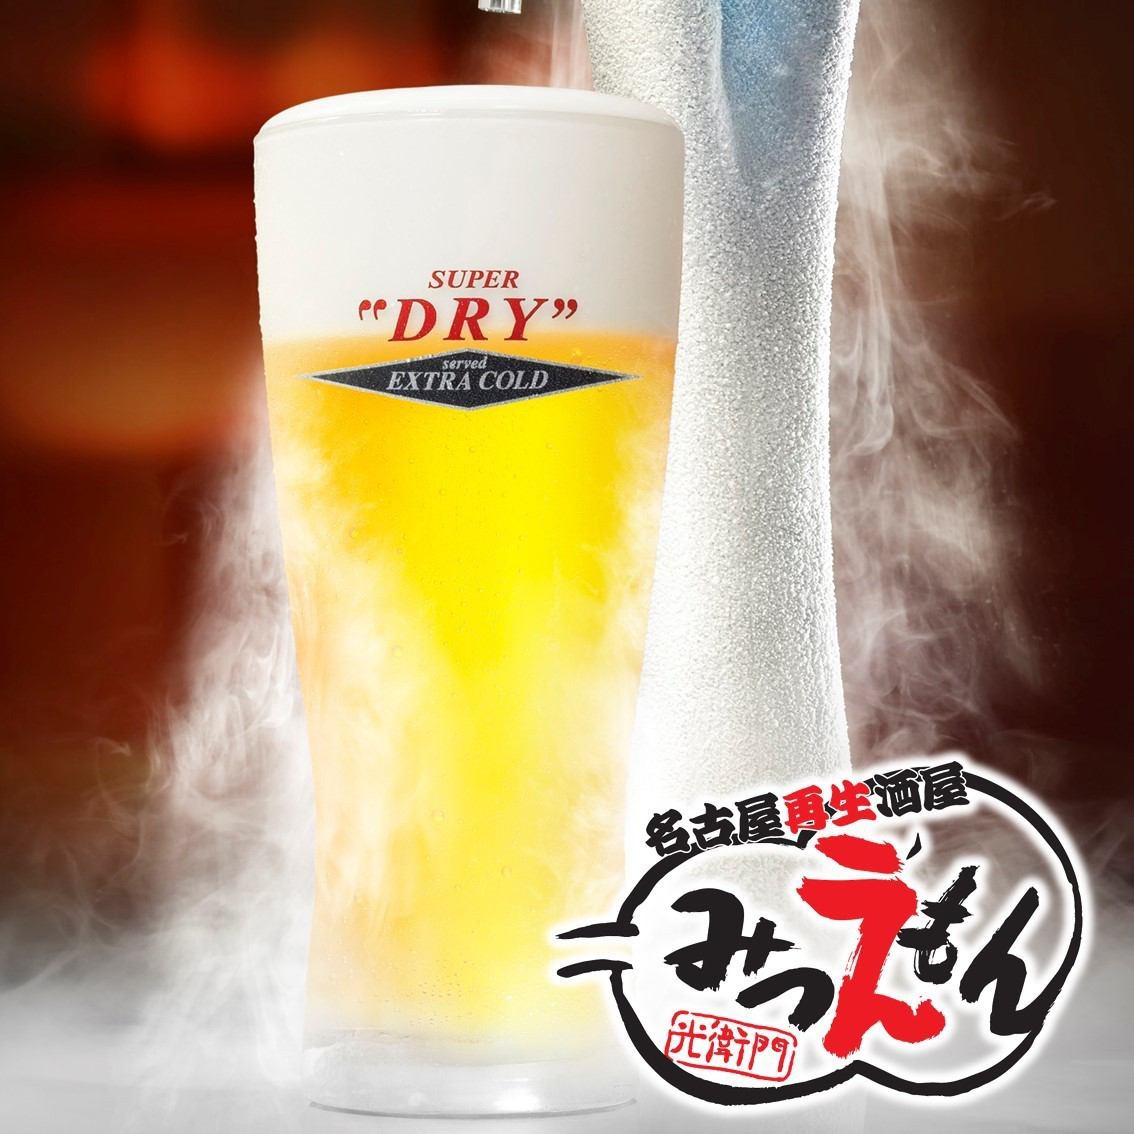 Extra cold Asahi Super Dry is cheap even with many cups!